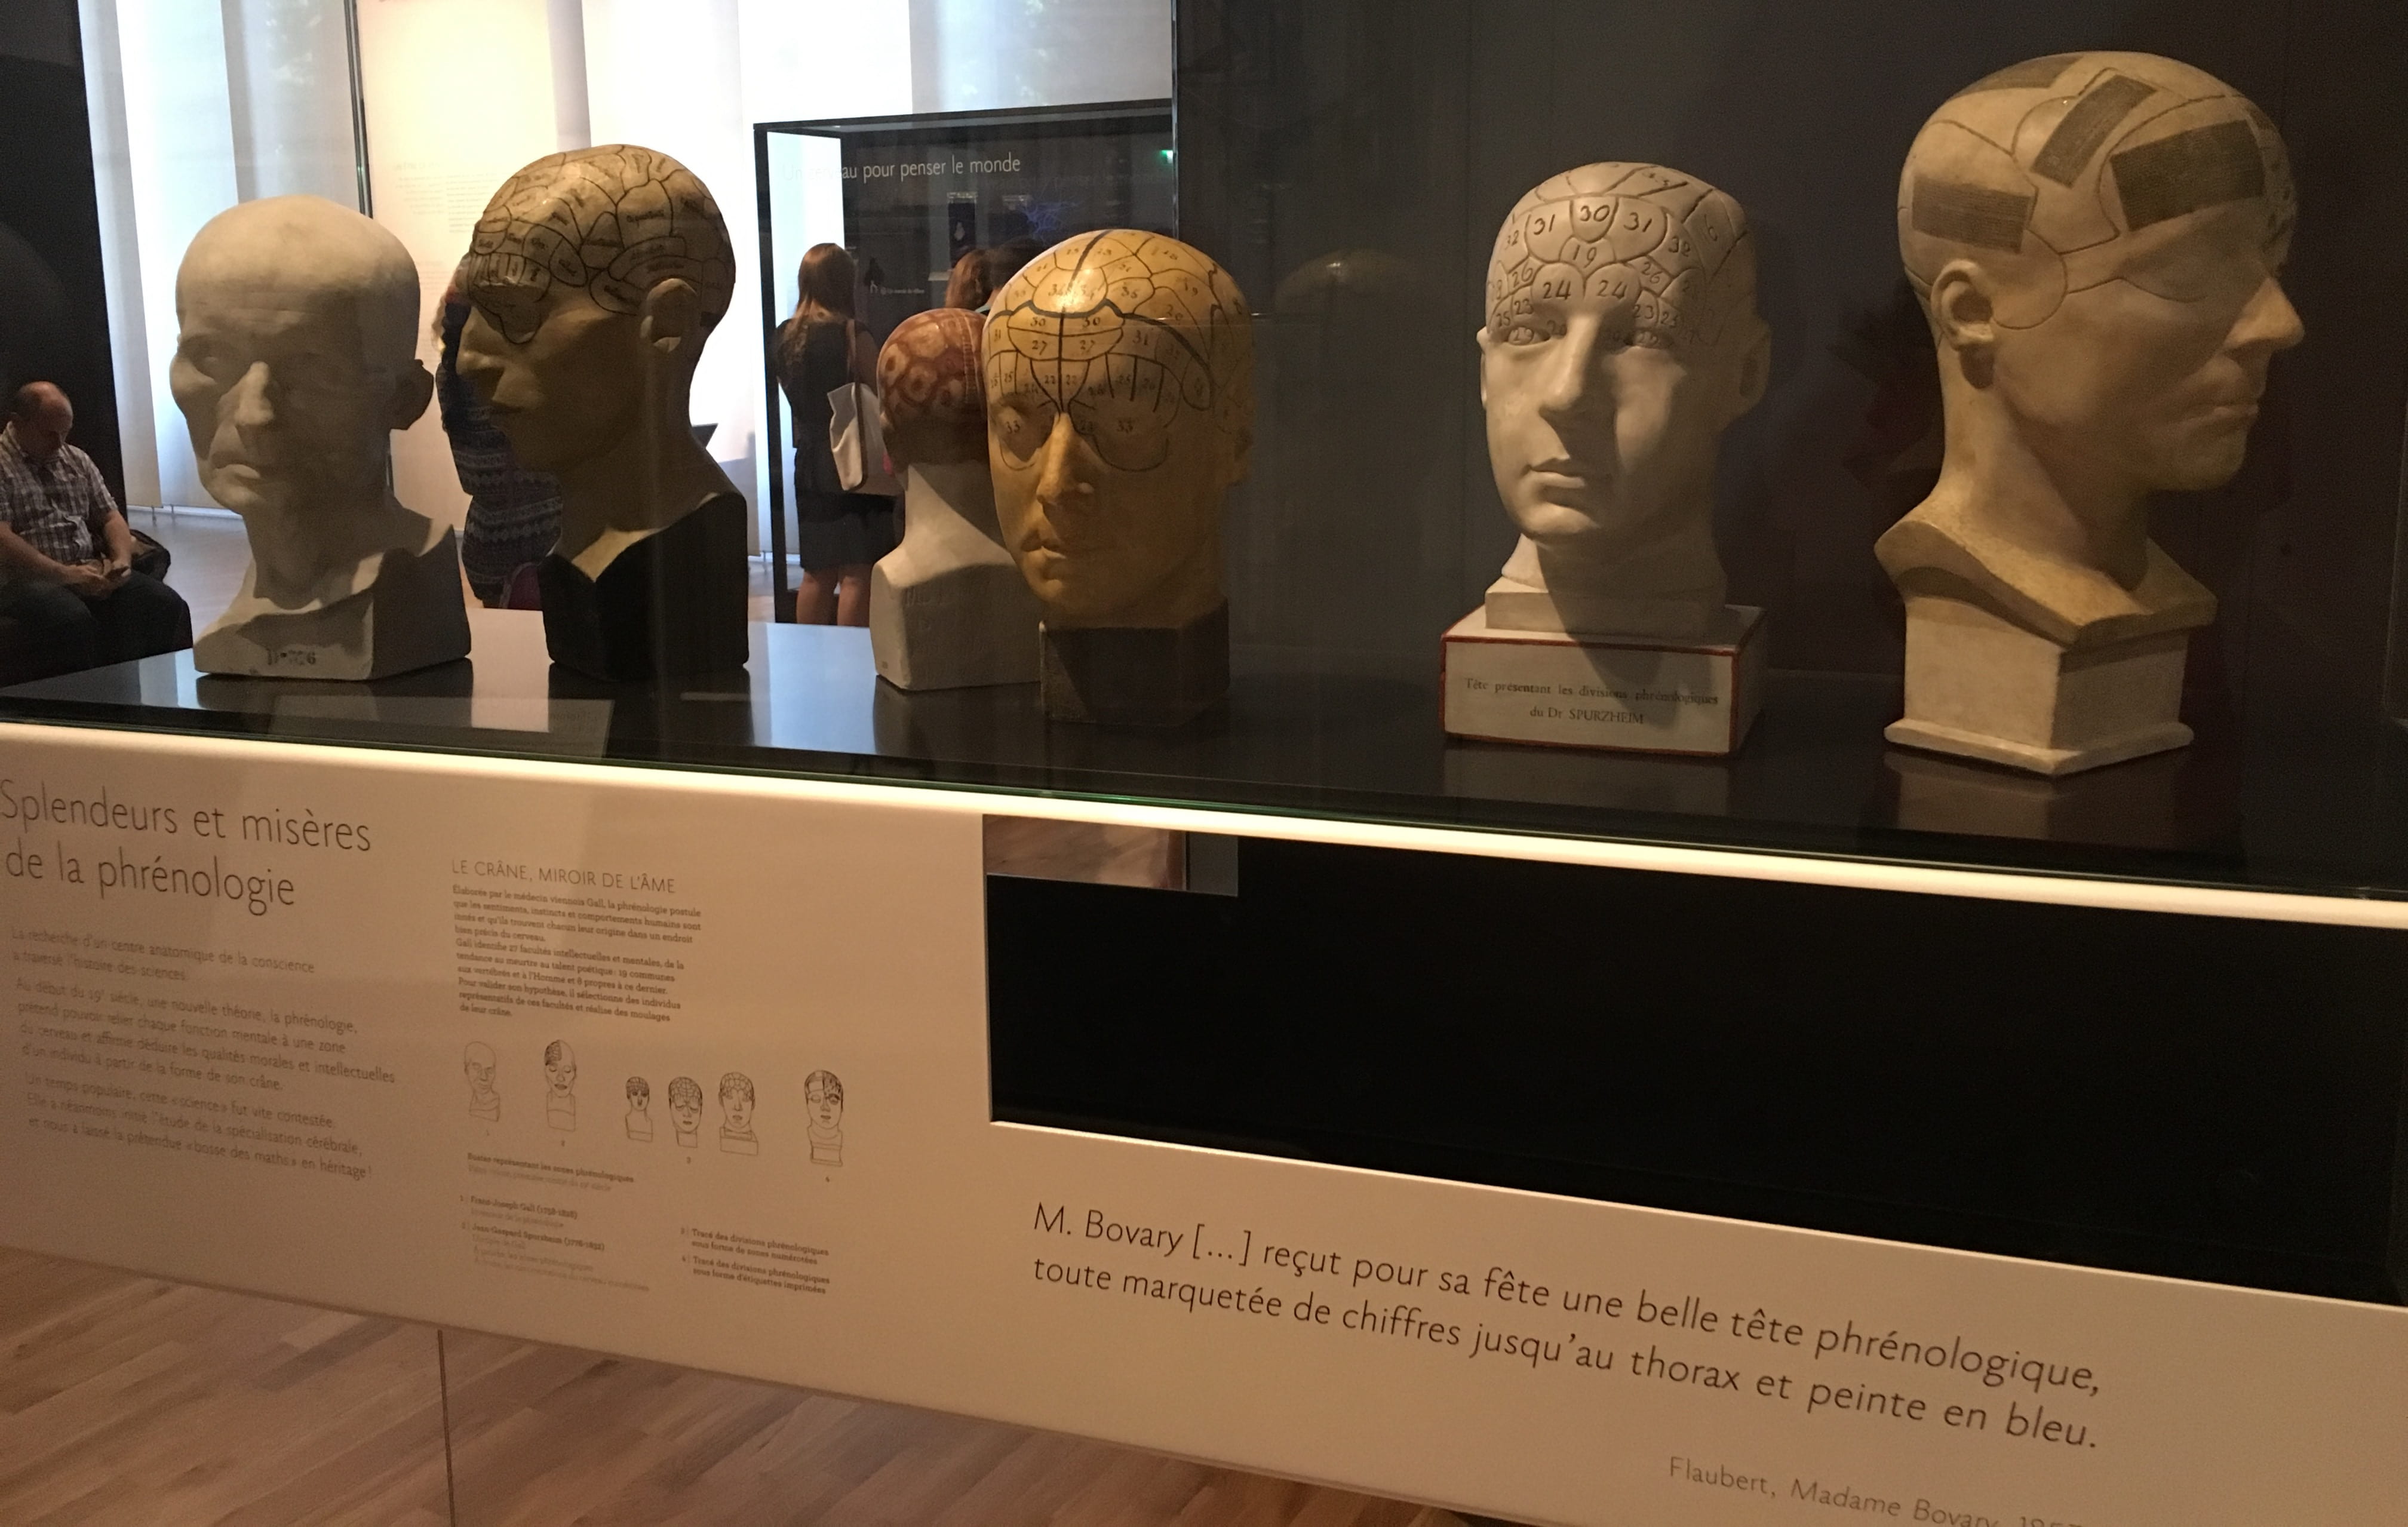 Phrenological busts repurposed to show the failings of such methodology (author photo)